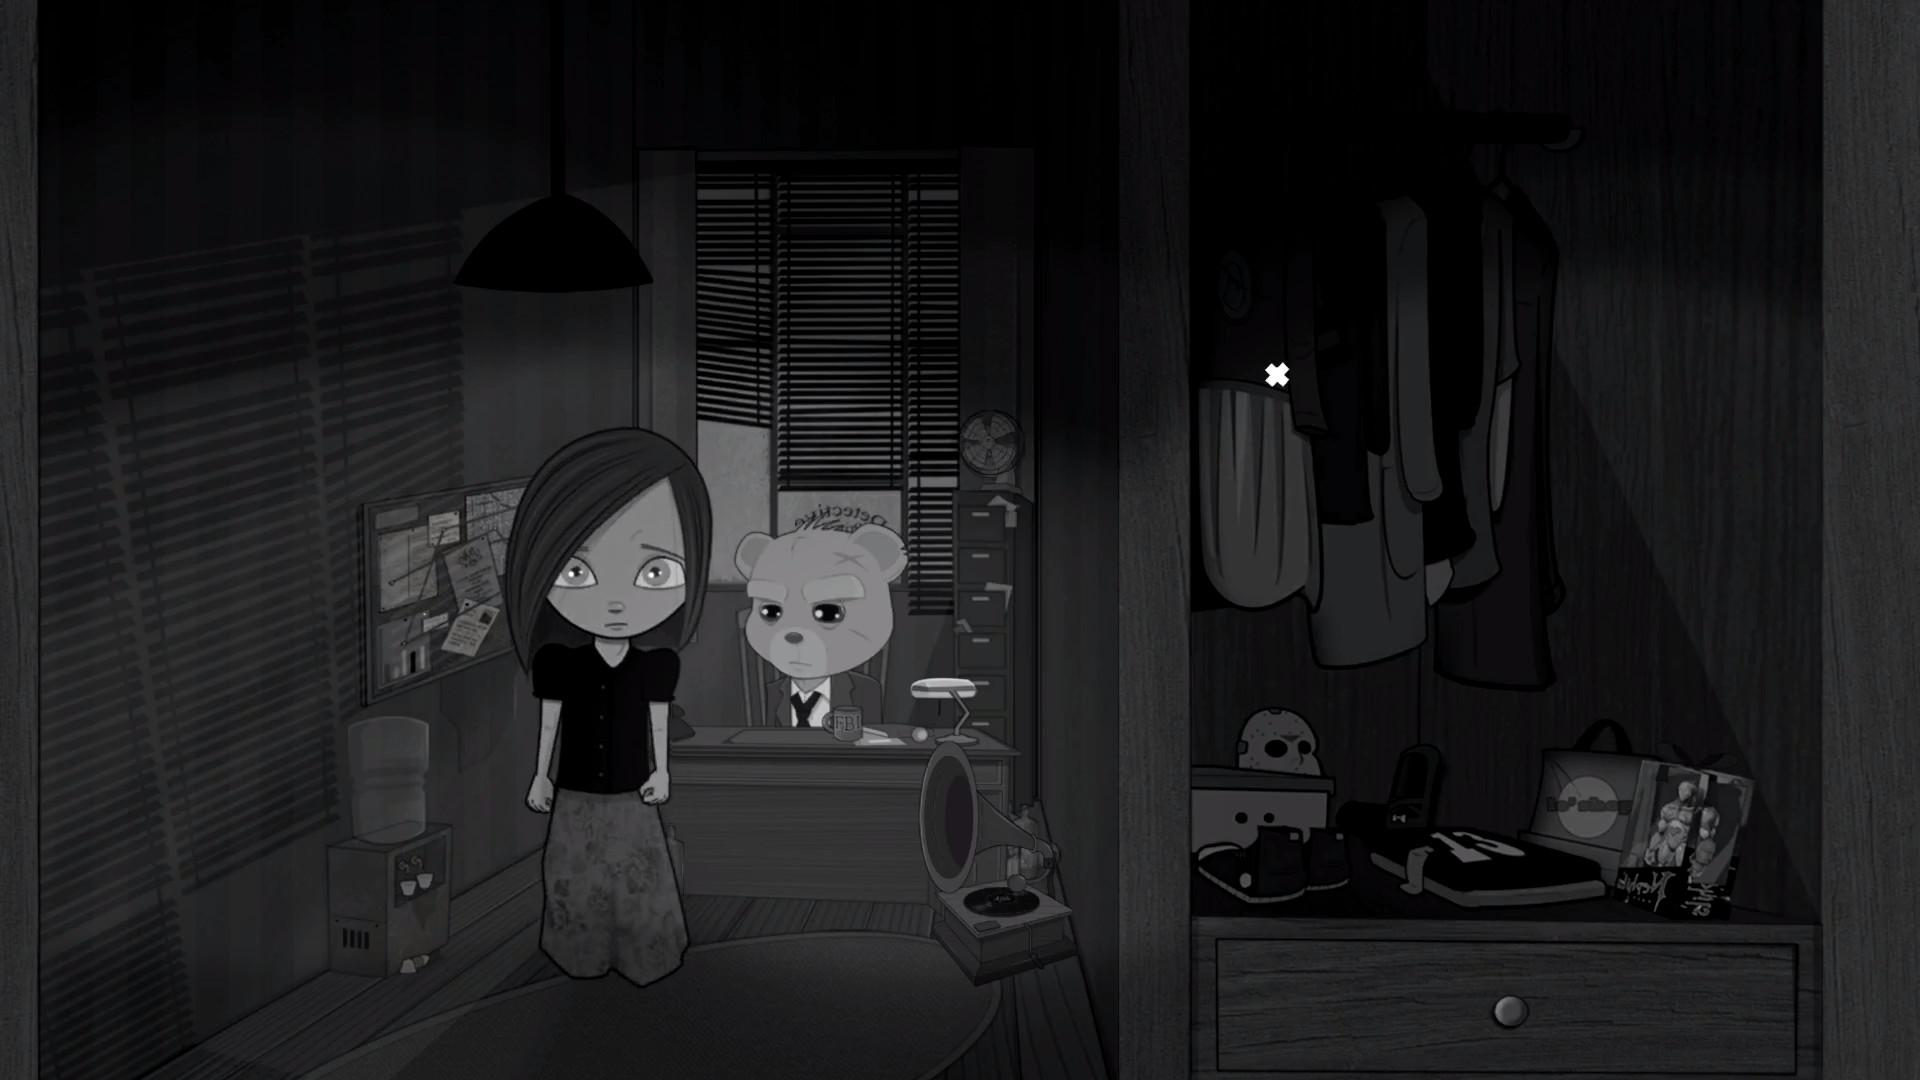 Screenshot №1 from game Bear With Me - Episode One